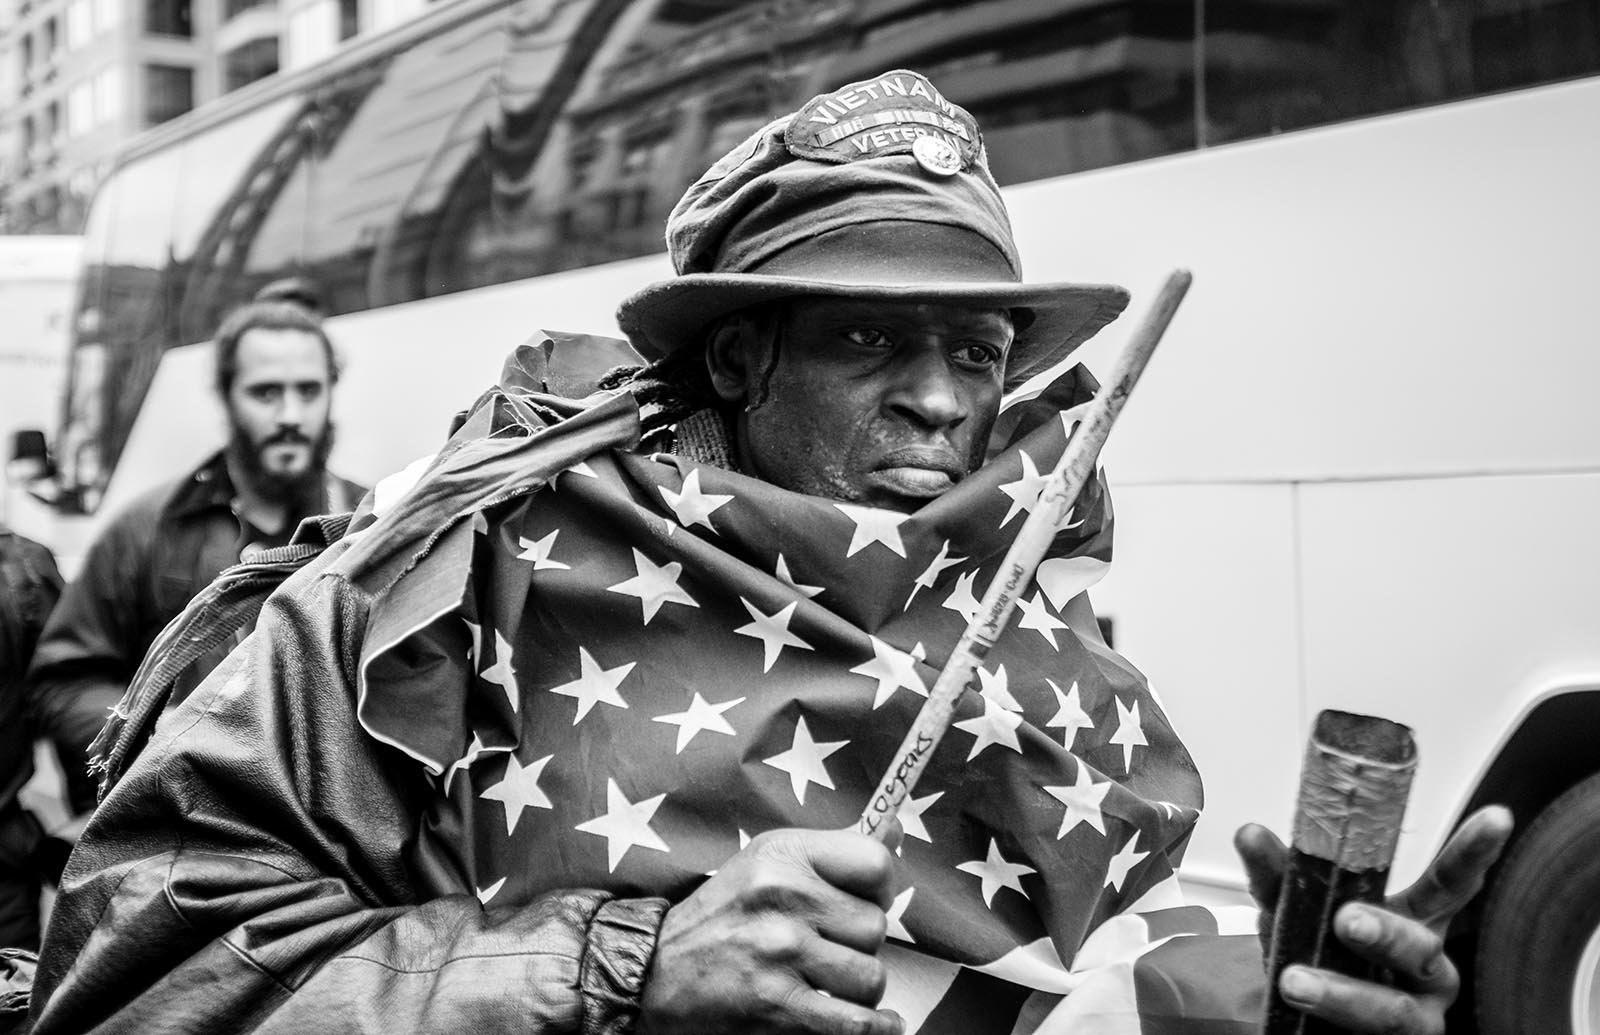 Meet Michael McCoy, the Veteran Who Fights PTSD with Photography